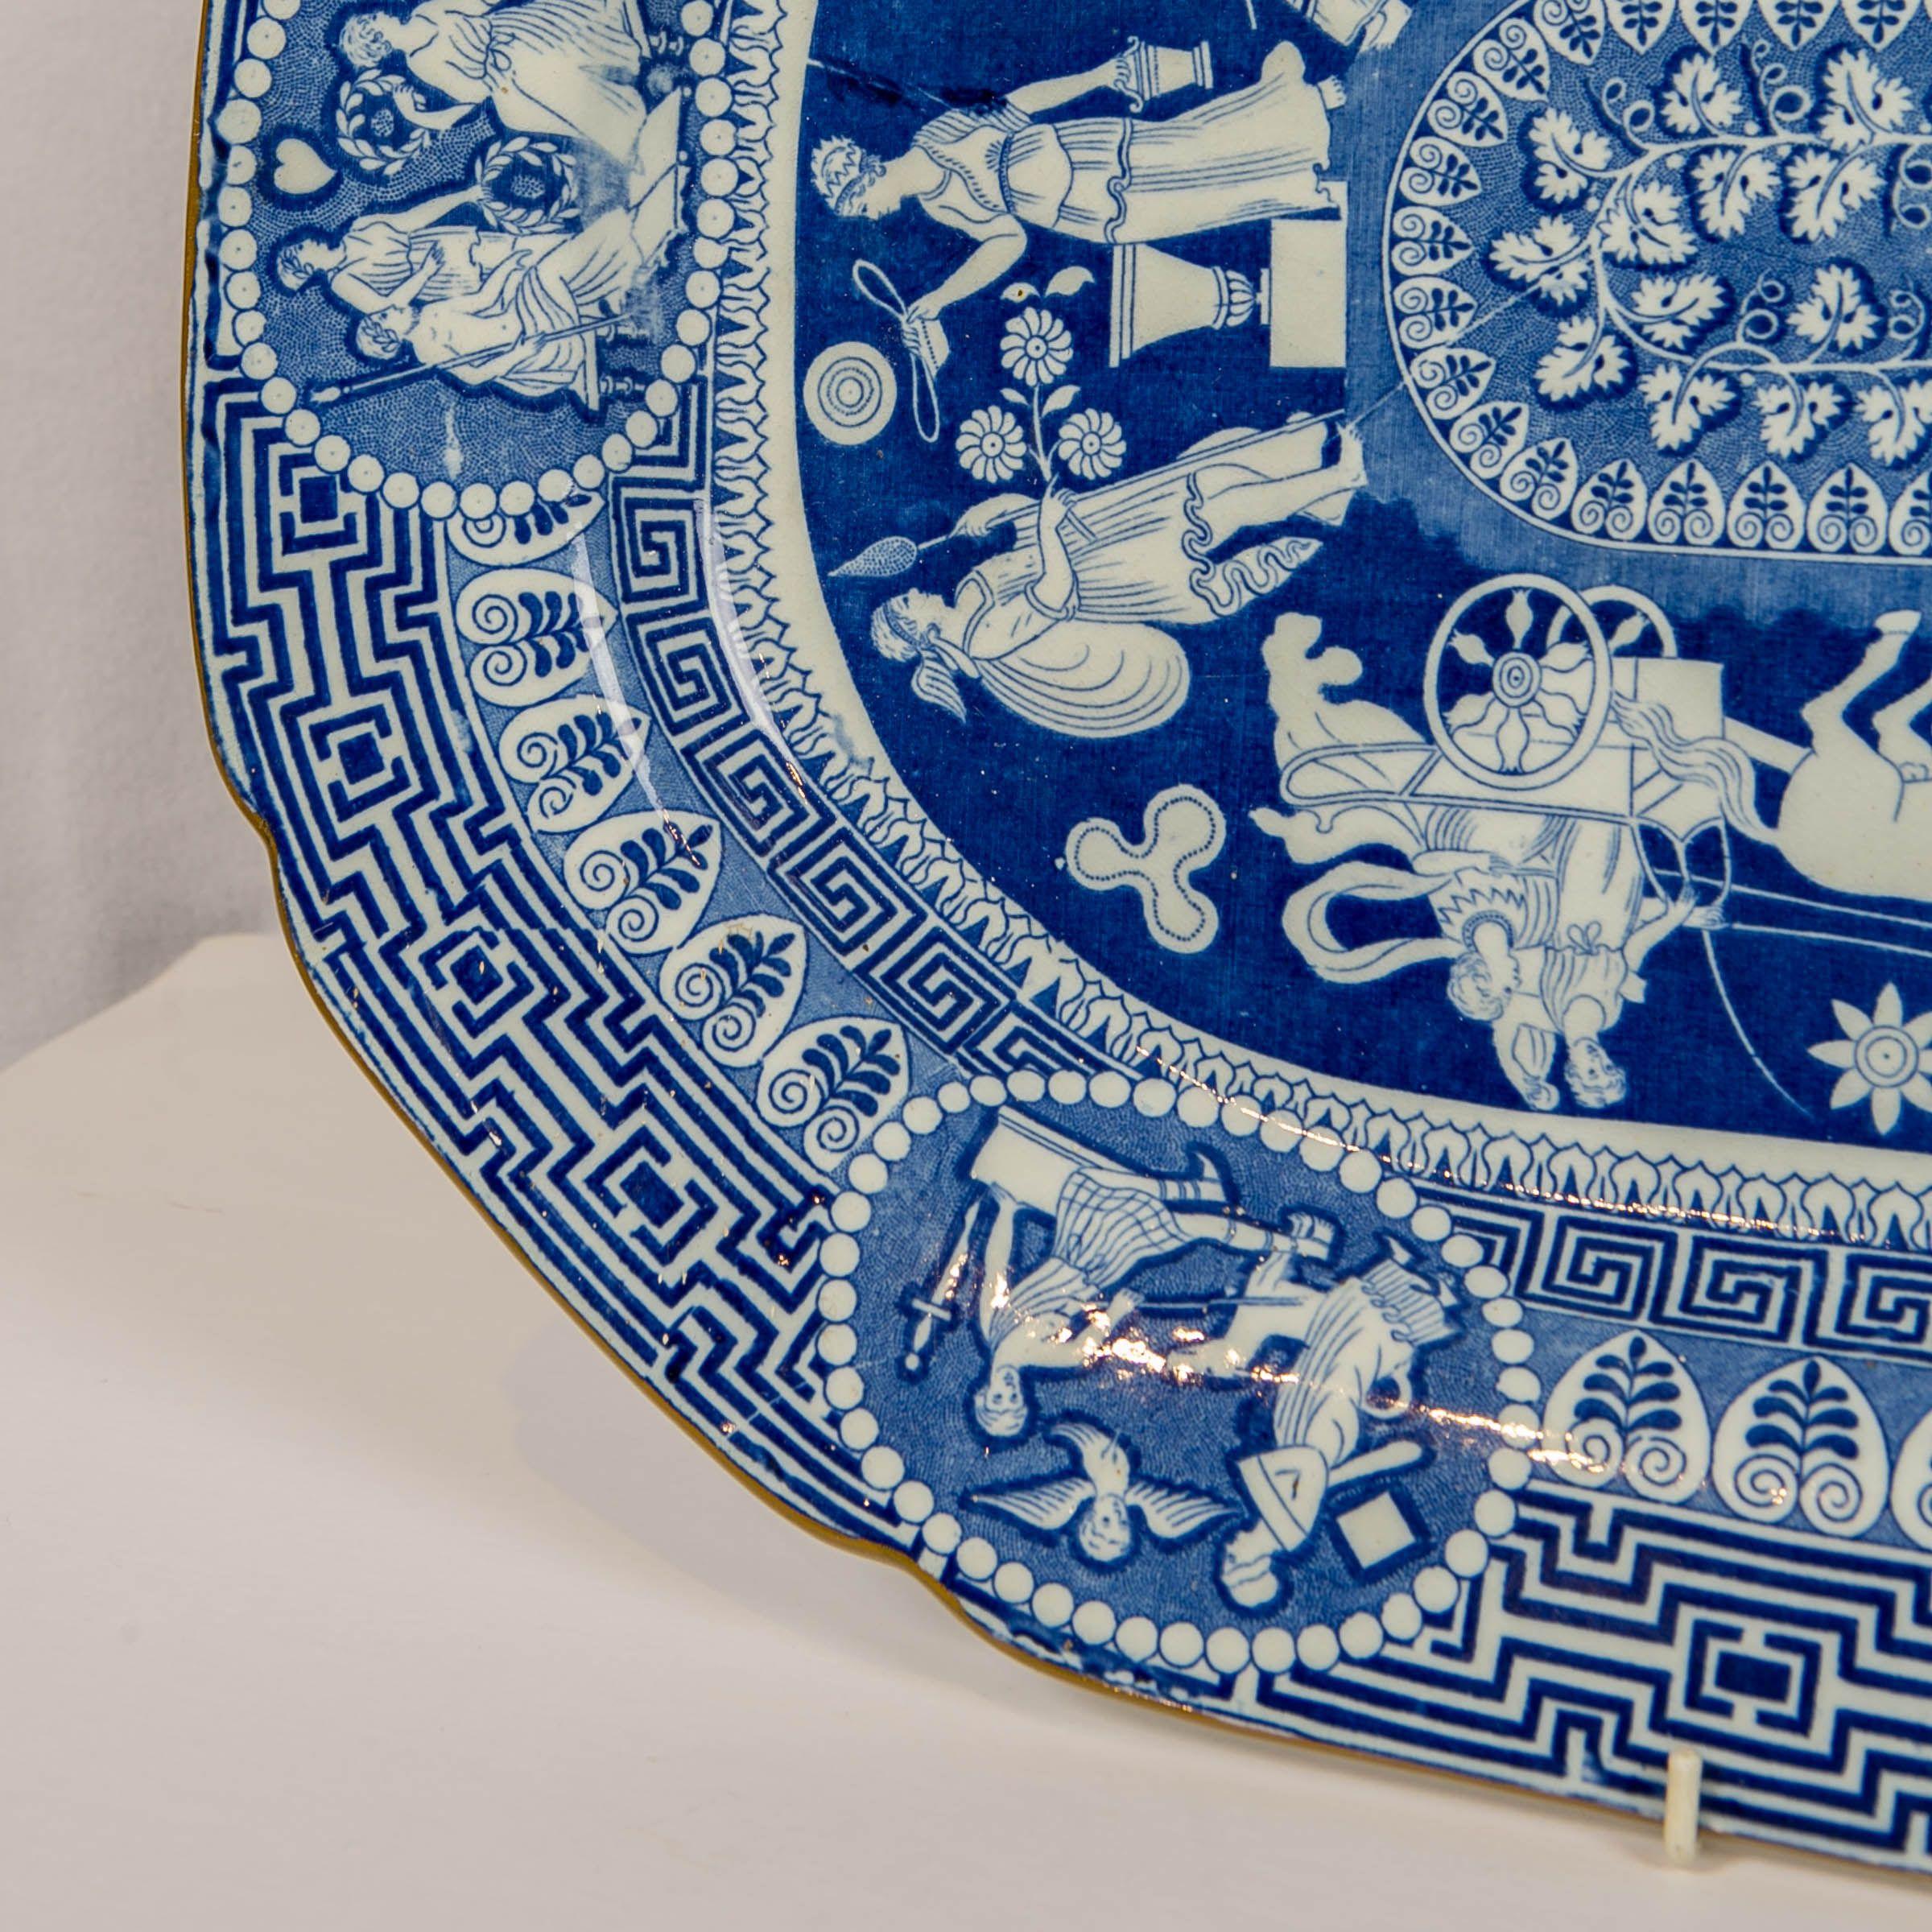 English Large Blue and White Neoclassical Platter Made by Heculaneum in England, c-1810